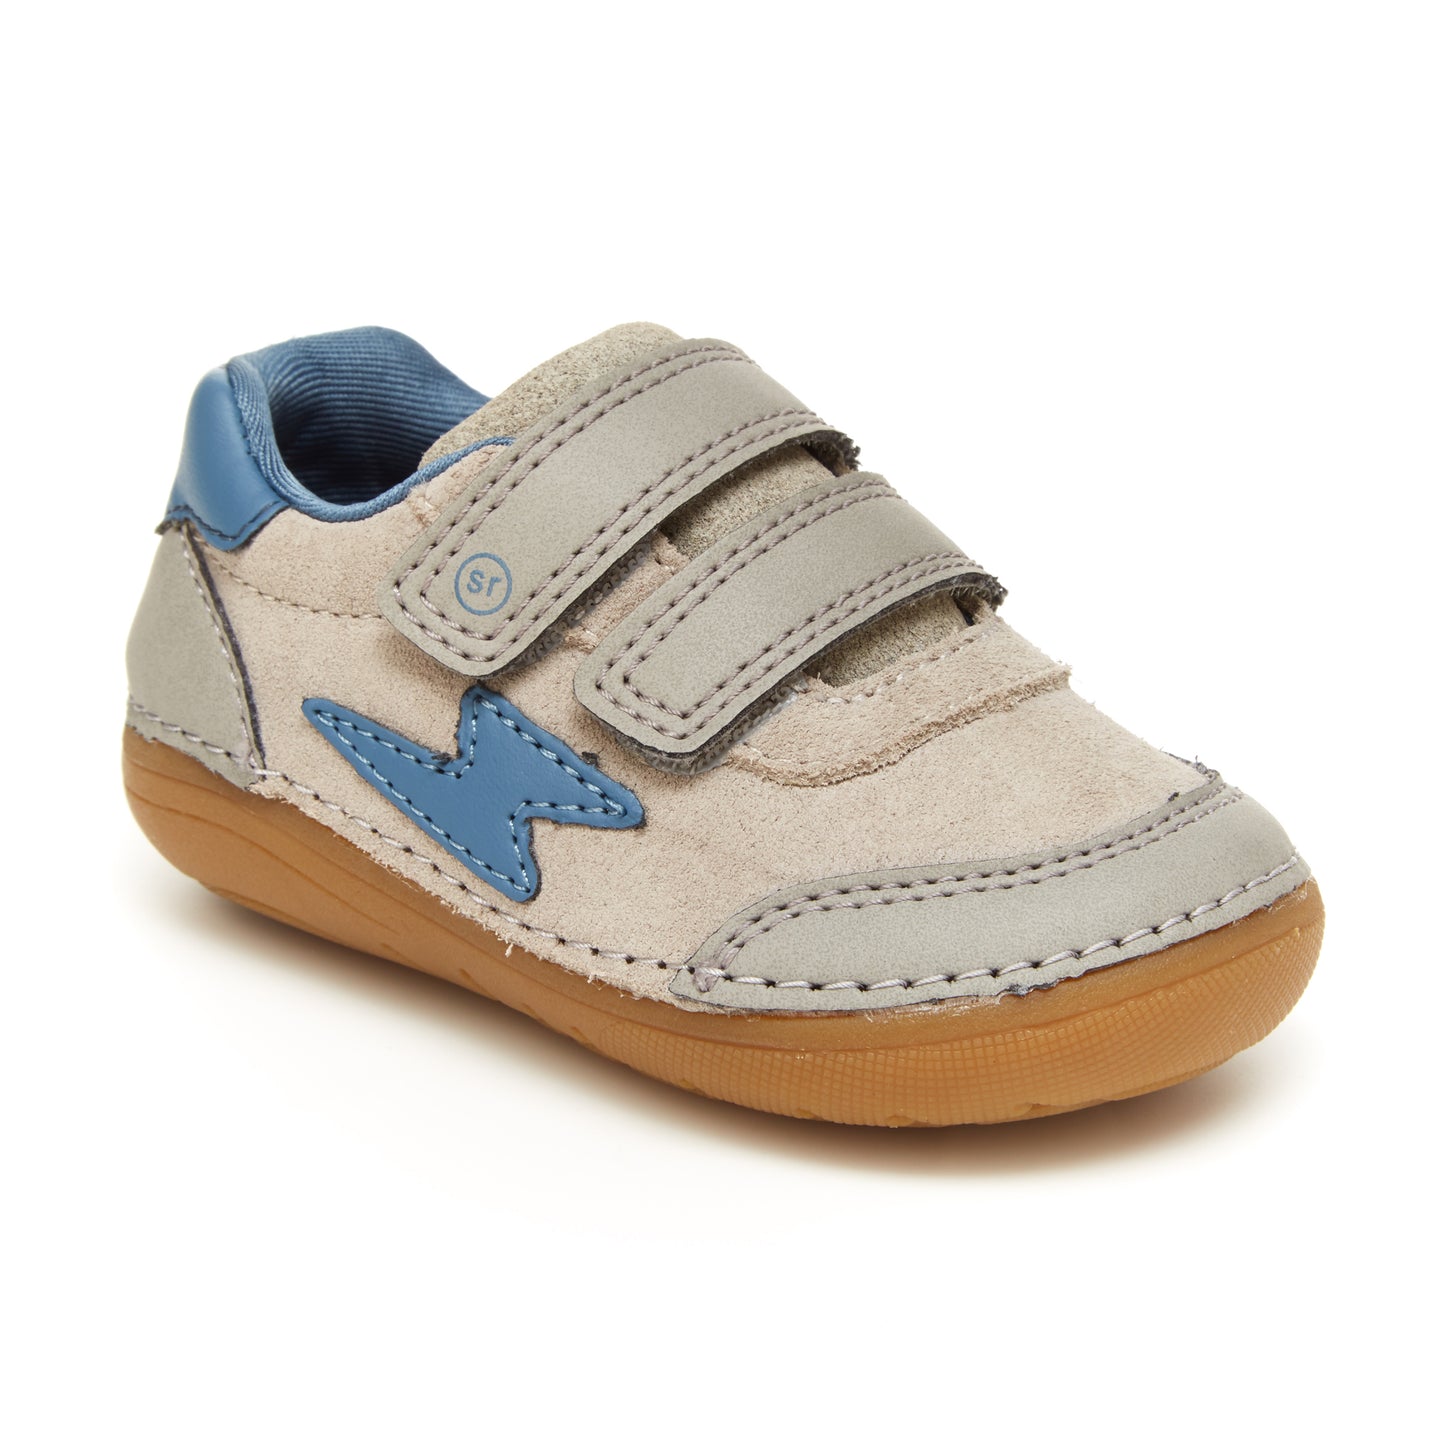 soft-motion-zips-kennedy-sneaker-littlekid-taupe-blue__Taupe/Blue_1